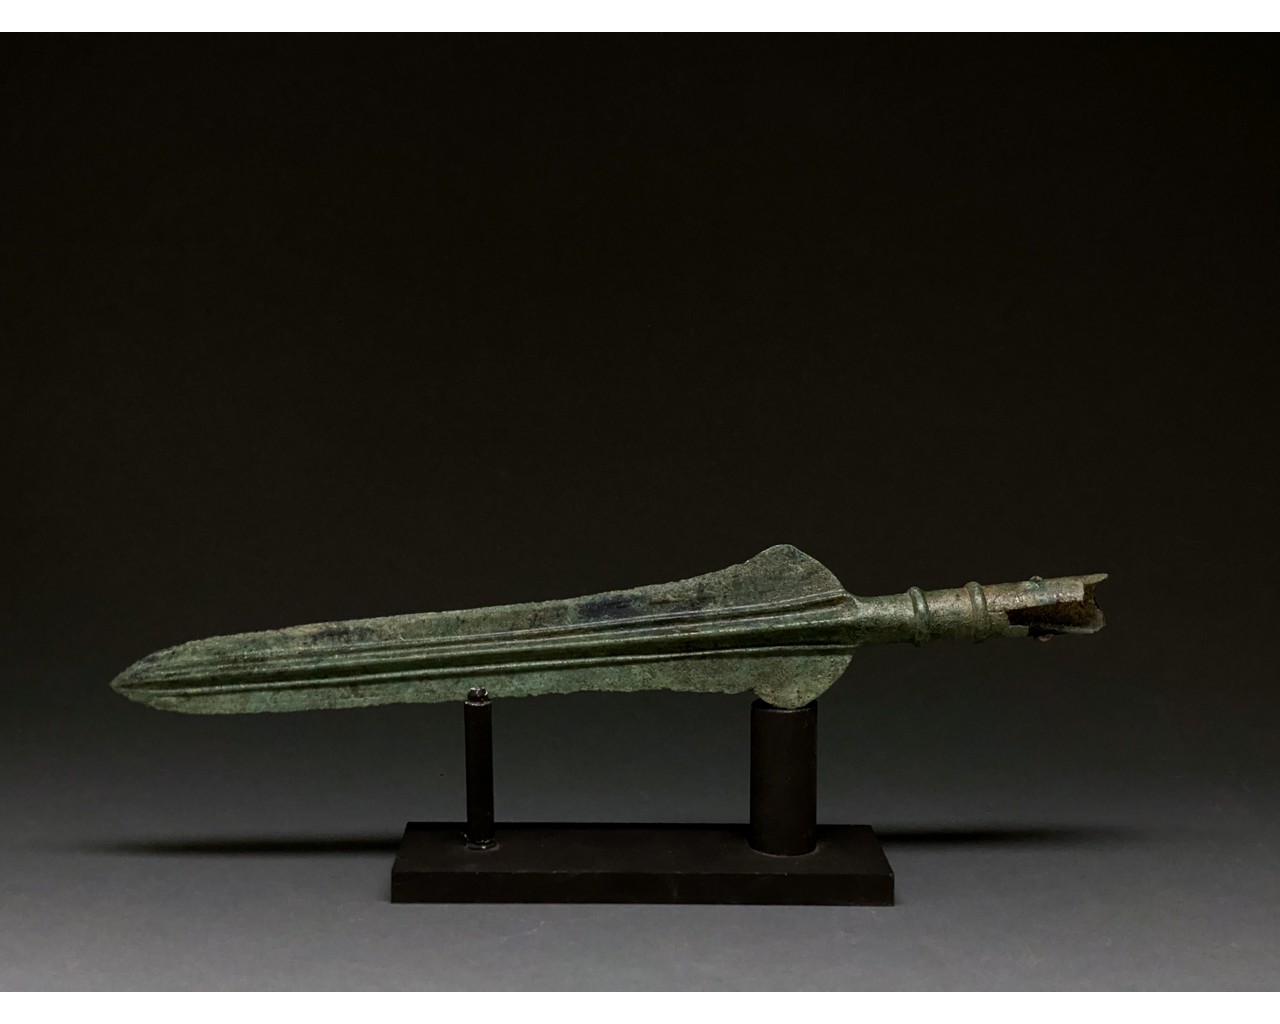 MAGNIFICENT ANCIENT BRONZE DECORATED SPEAR ON STAND - Image 7 of 7